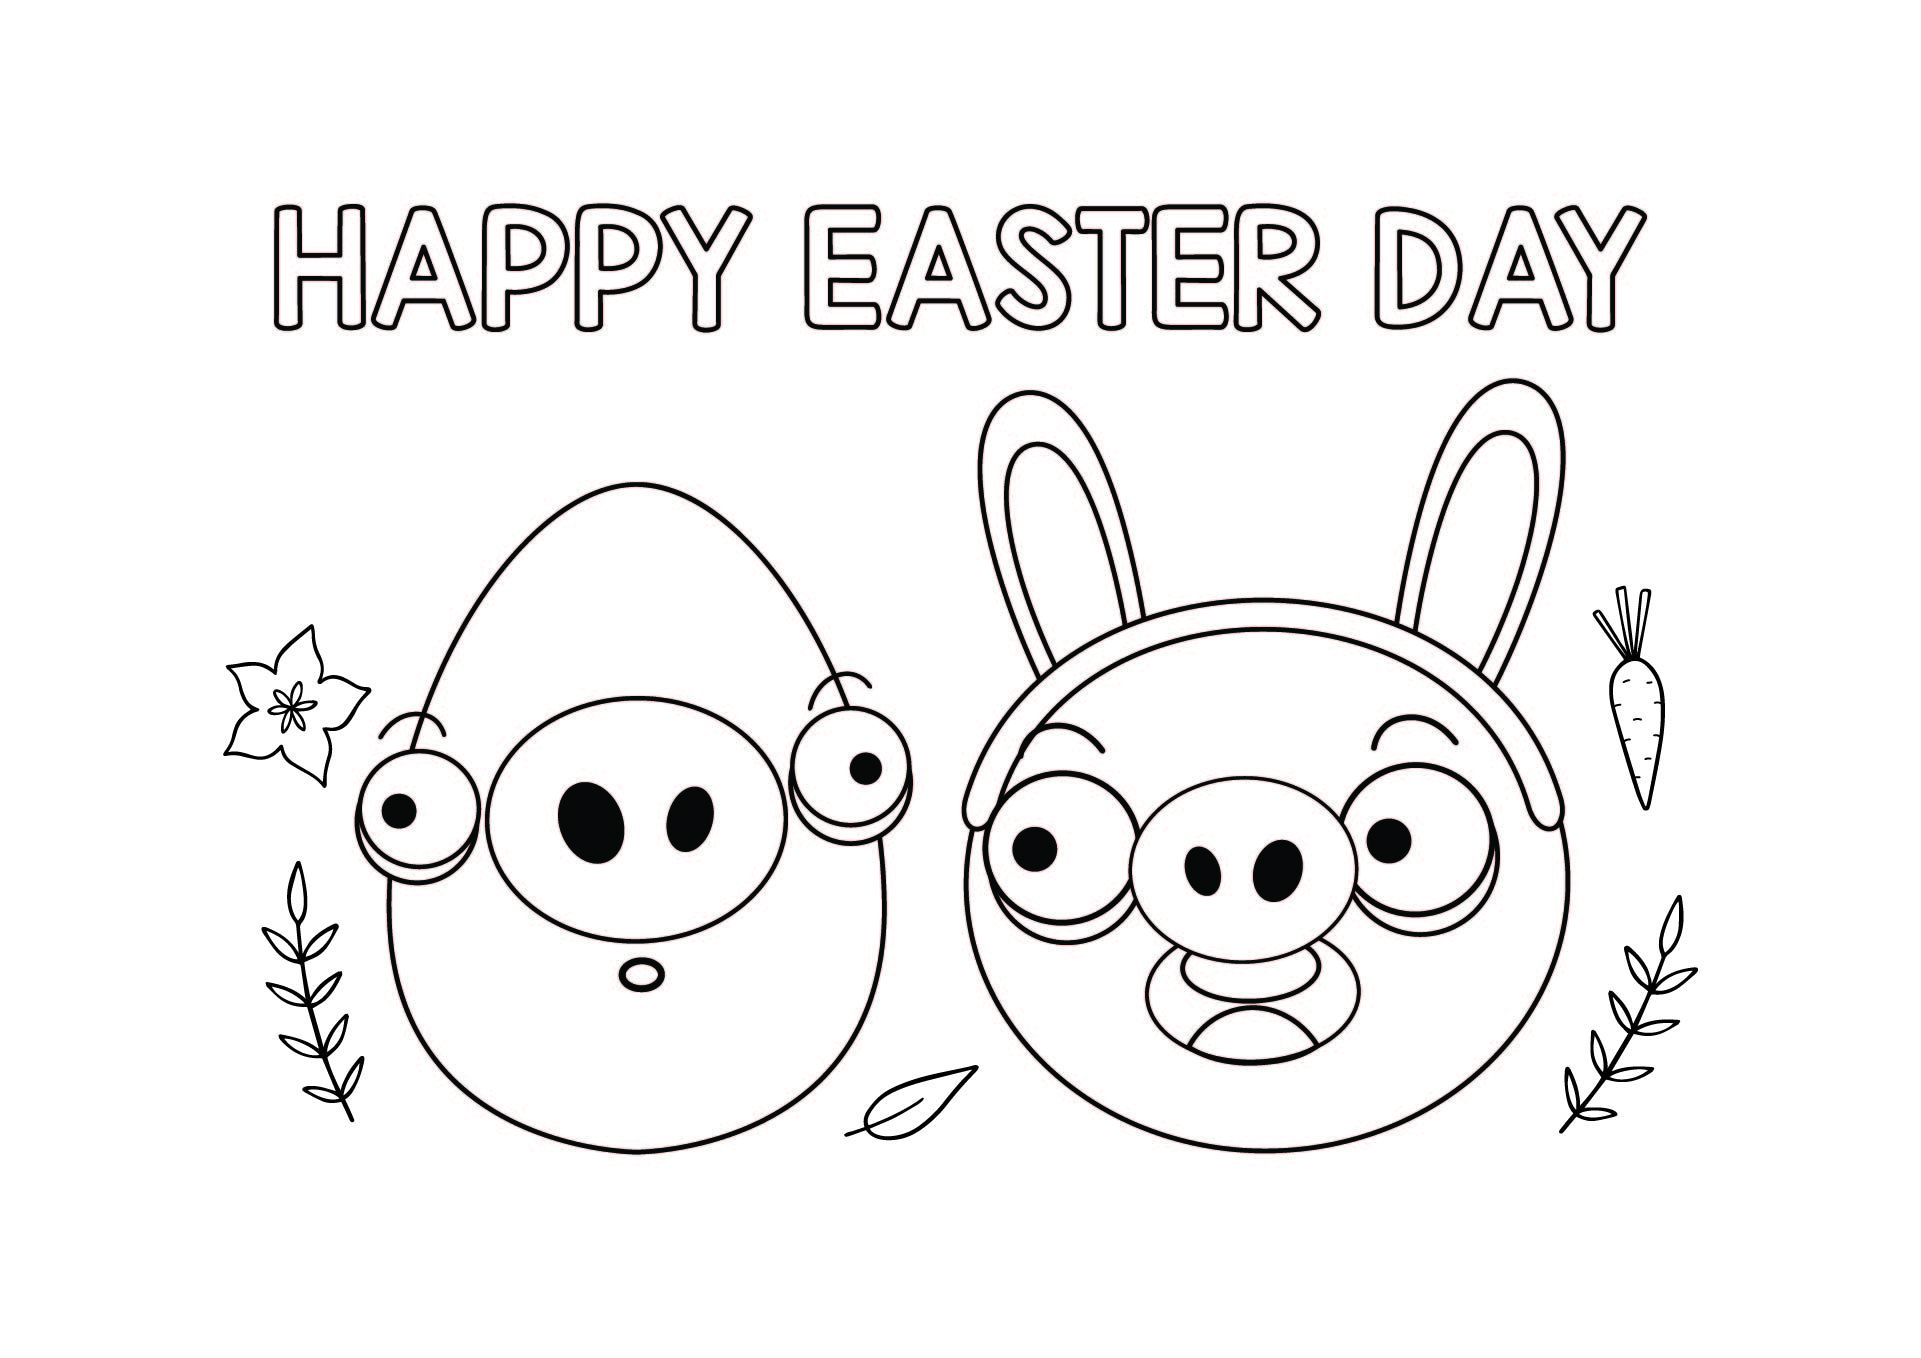 Best easter printable coloring pages minions for free at printableecom easter printables minion theme happy easter day